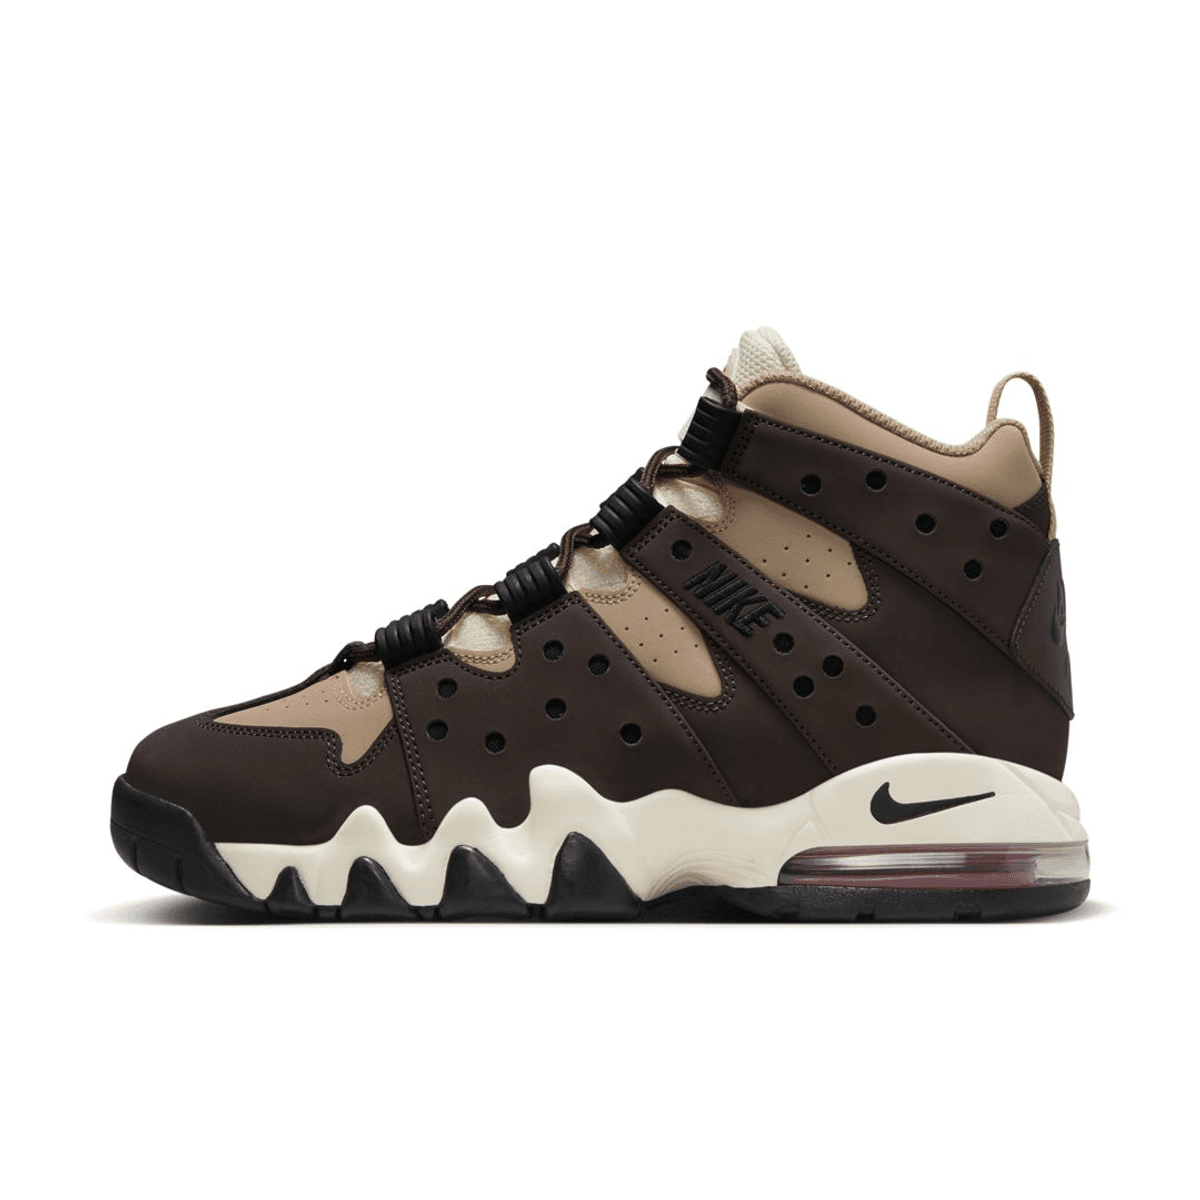 The Nike Air Max 2 CB 94 "Baroque Brown" Releases This October